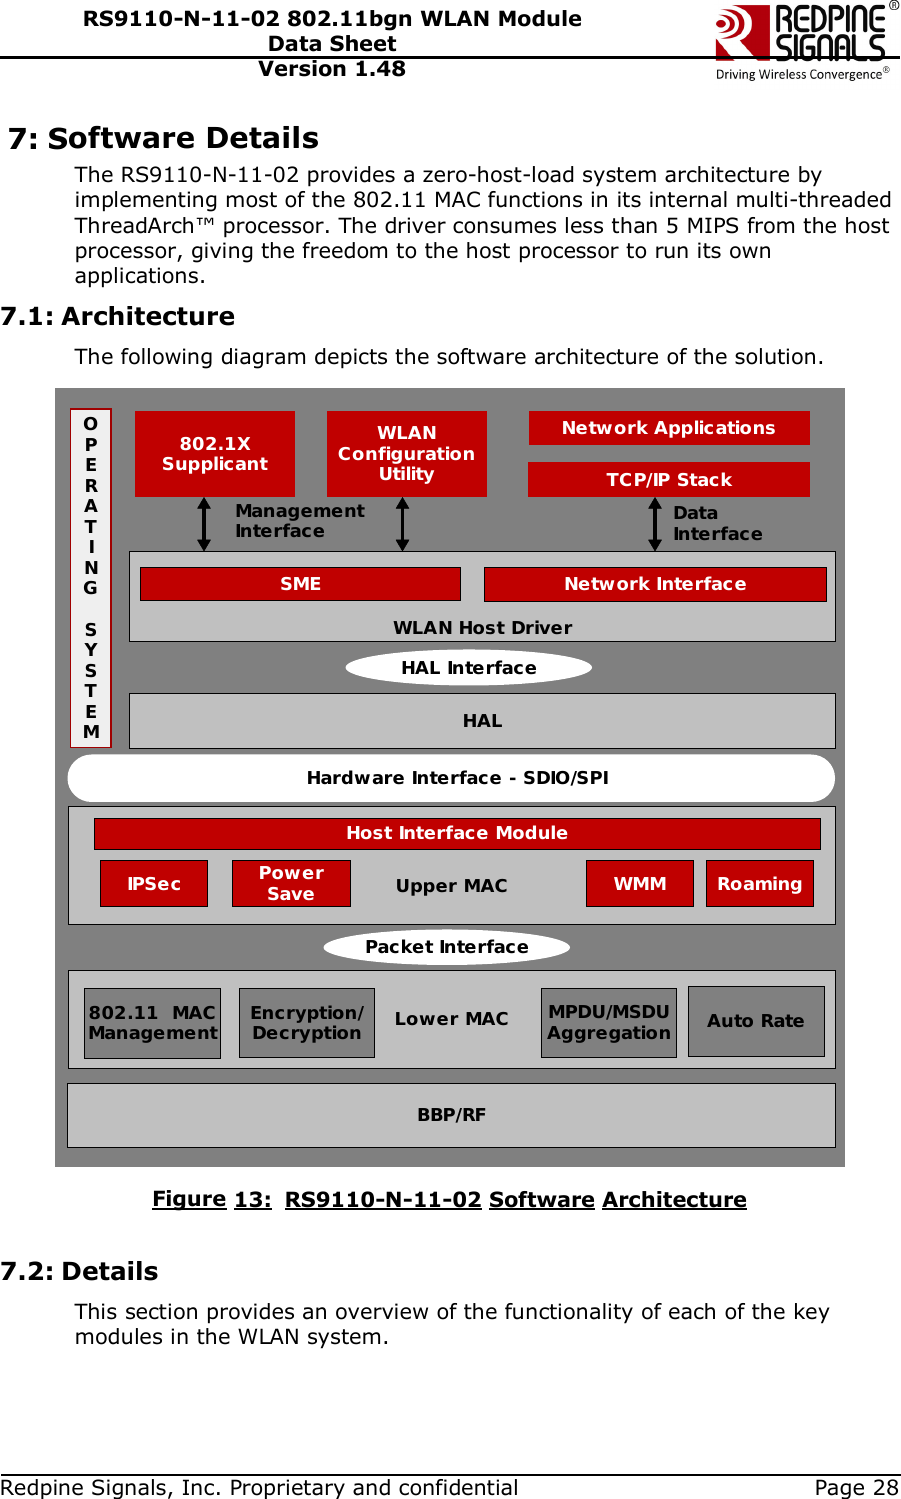   Redpine Signals, Inc. Proprietary and confidential  Page 28 RS9110-N-11-02 802.11bgn WLAN Module Data Sheet Version 1.48 7: Software Details The RS9110-N-11-02 provides a zero-host-load system architecture by implementing most of the 802.11 MAC functions in its internal multi-threaded ThreadArch™ processor. The driver consumes less than 5 MIPS from the host processor, giving the freedom to the host processor to run its own applications. 7.1: Architecture The following diagram depicts the software architecture of the solution. OPERATINGSYSTEMBBP/RFLower MACUpper MACHost Interface ModuleIPSec PowerSave WMM RoamingEncryption/Decryption Auto RateMPDU/MSDUAggregation802.11  MACManagementHALHardware Interface - SDIO/SPIWLAN Host DriverSME Network Interface802.1XSupplicantWLANConfigurationUtility TCP/IP StackNetwork ApplicationsHAL InterfacePacket InterfaceManagementInterfaceDataInterface Figure 13:  RS9110-N-11-02 Software Architecture  7.2: Details This section provides an overview of the functionality of each of the key modules in the WLAN system. 